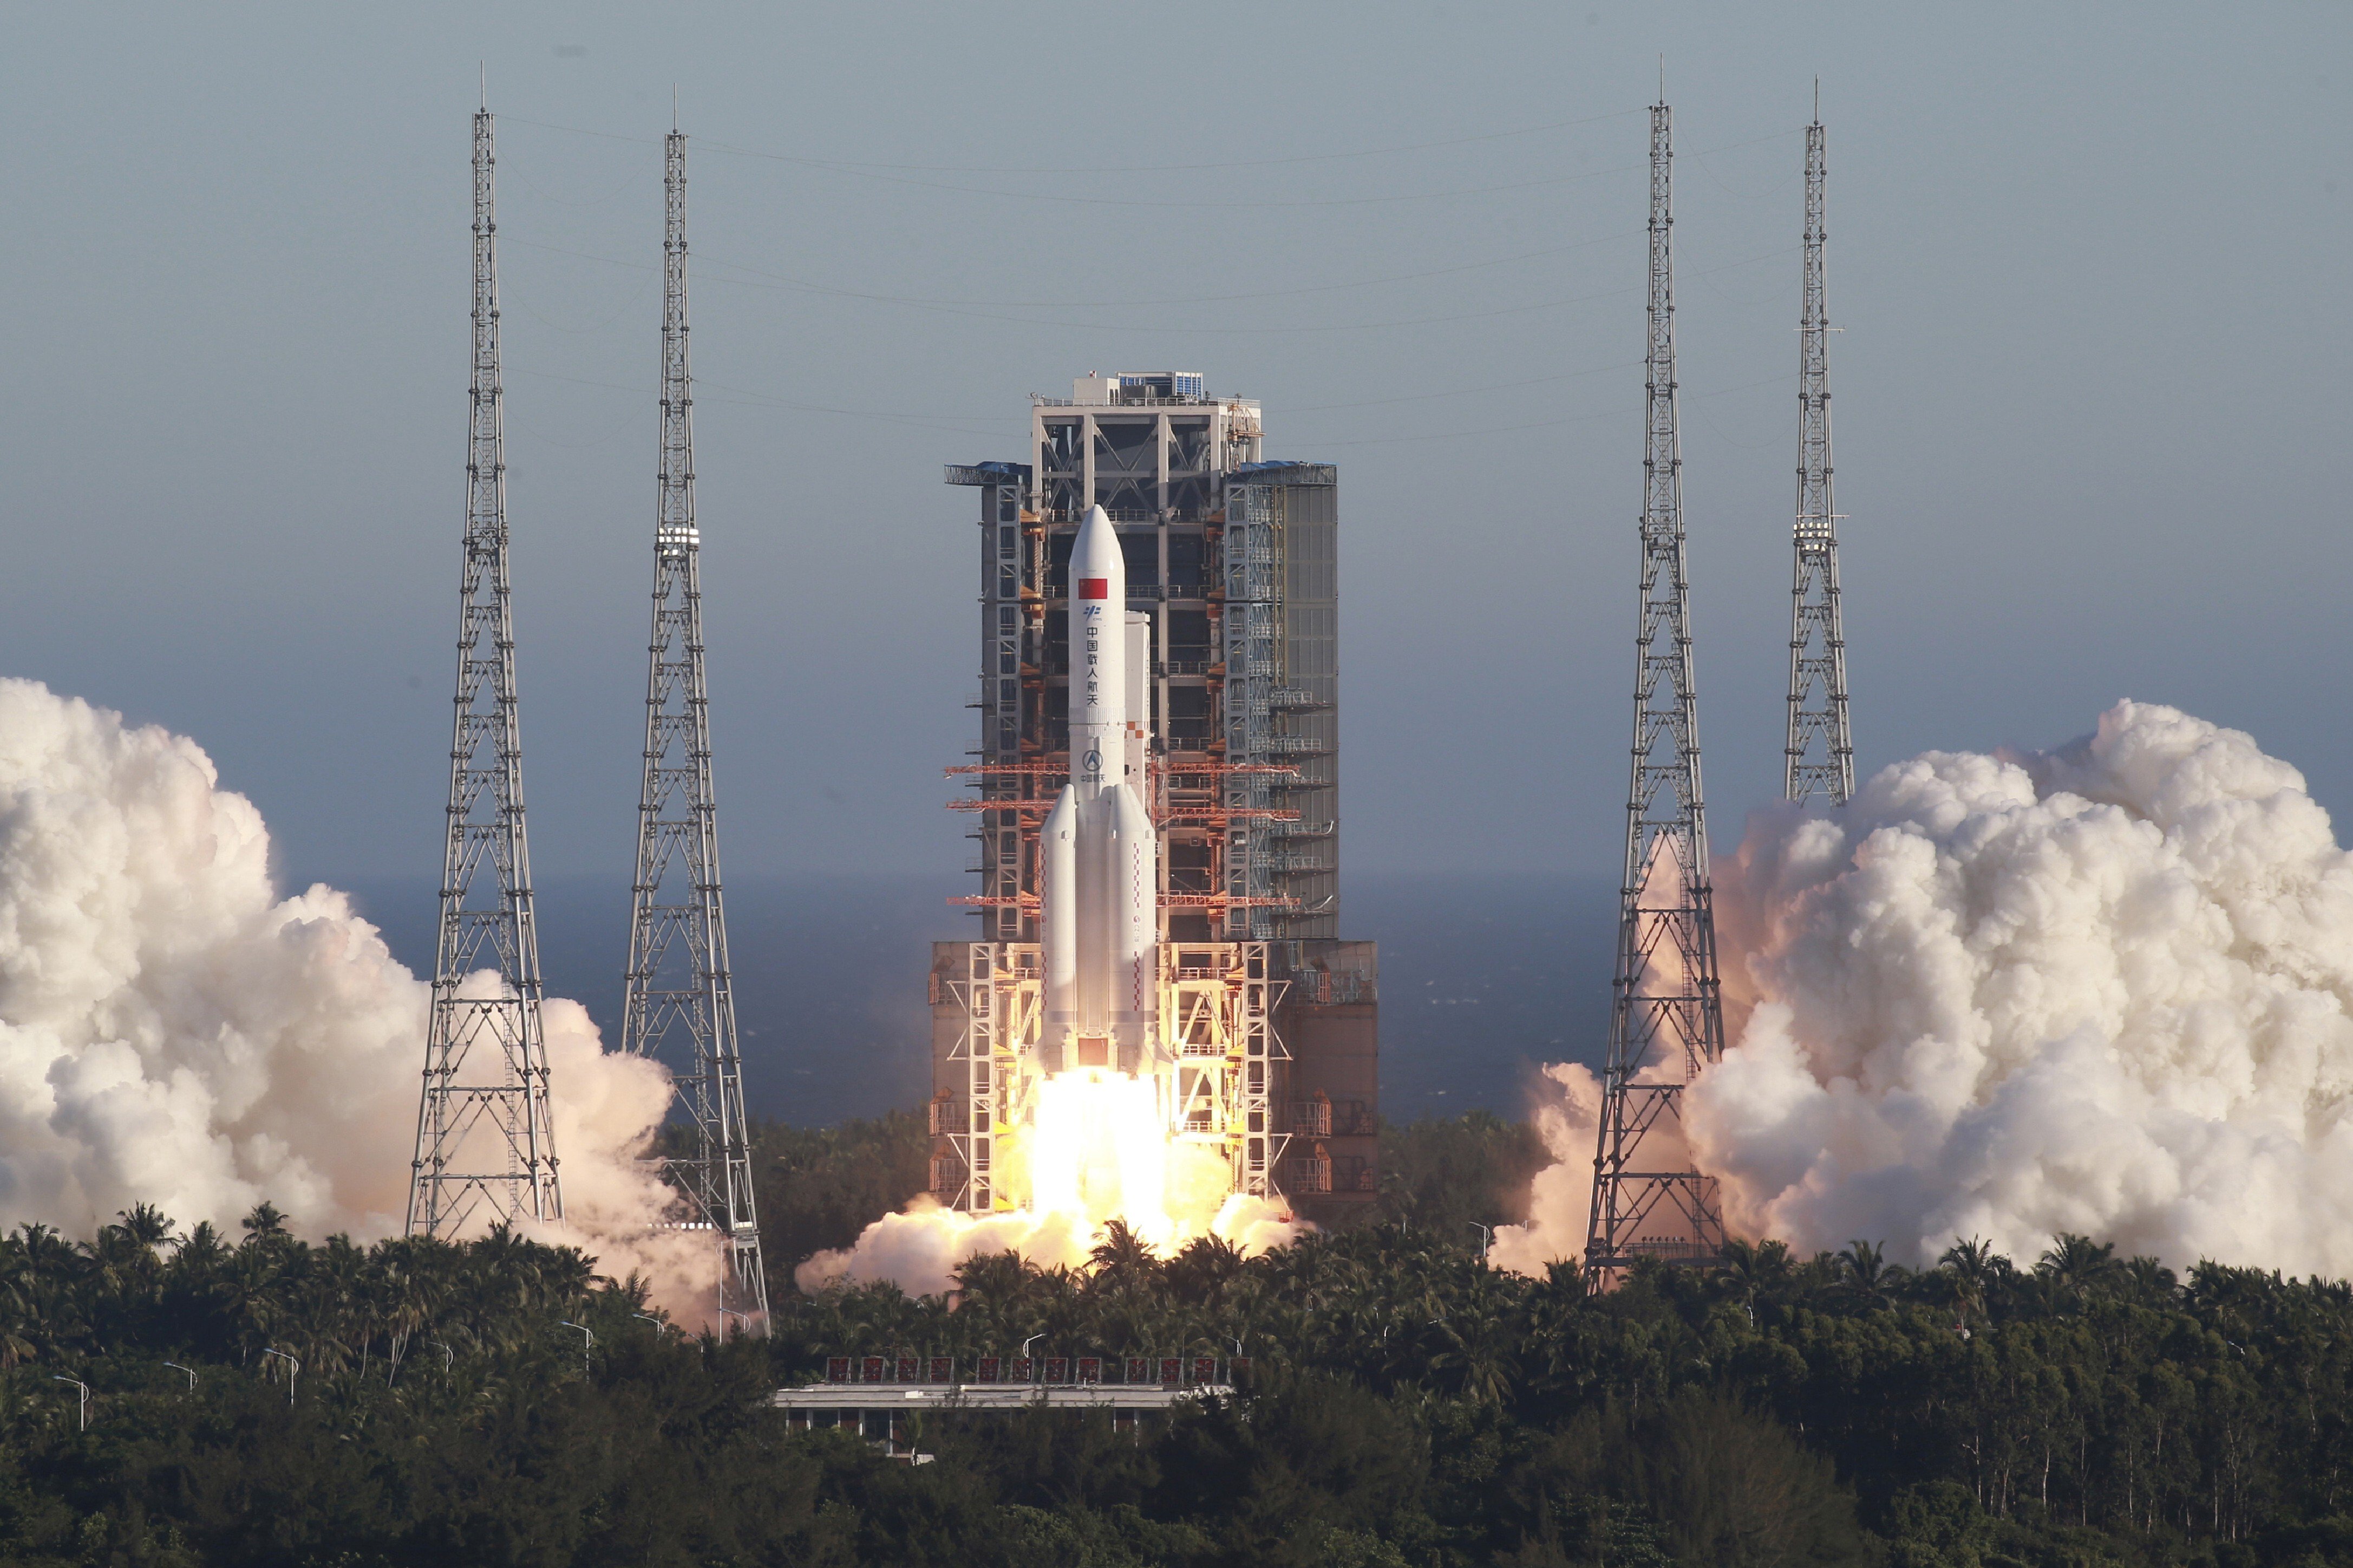 China has launched more satellites than any other country in recent years. Photo: AP